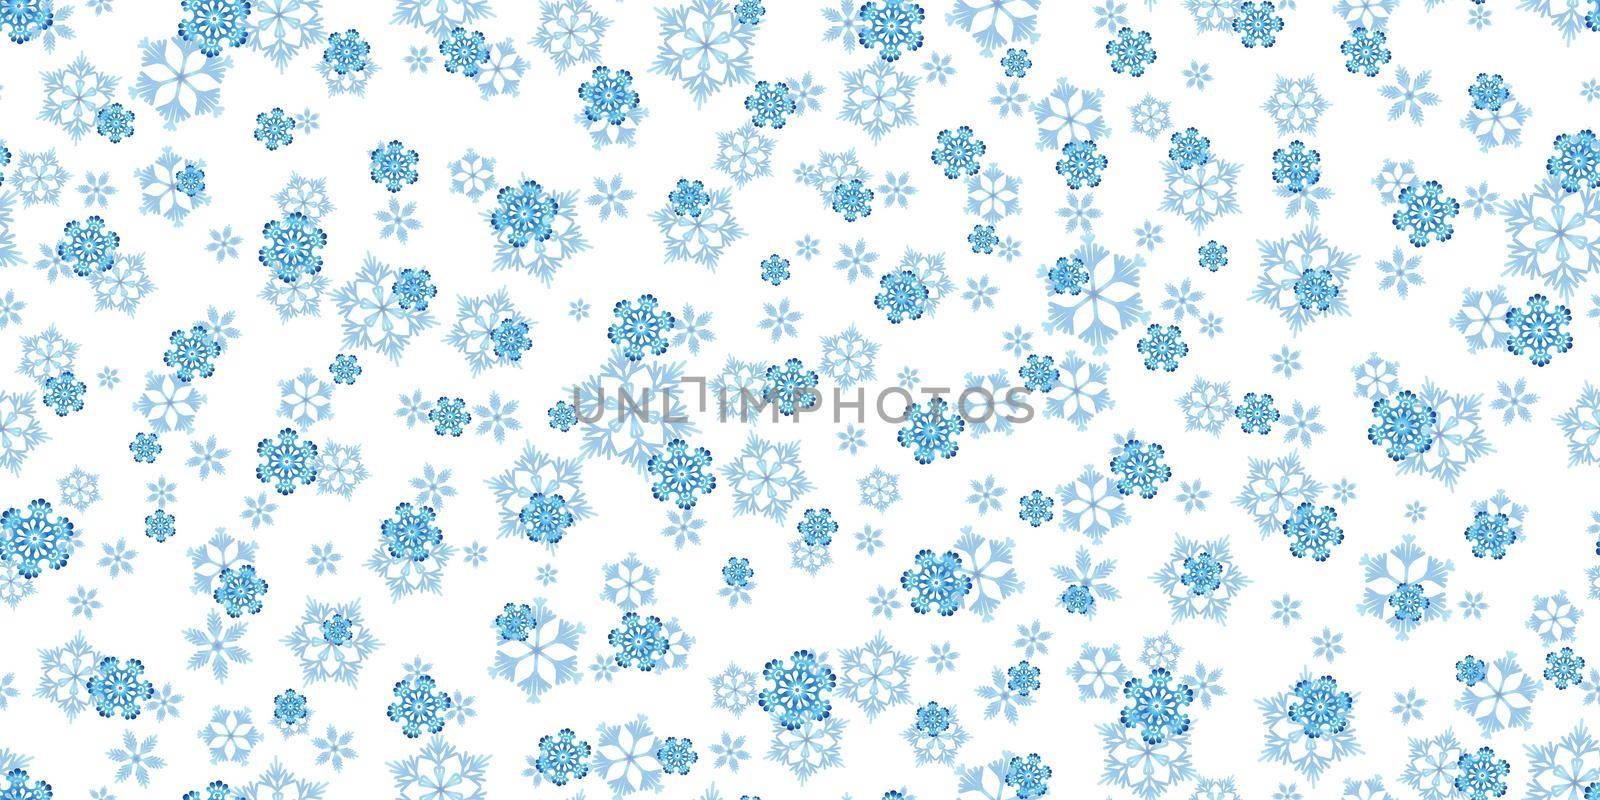 Winter seamless pattern with blue snowflakes on white background. Vector illustration for fabric, textile wallpaper, posters, gift wrapping paper. Christmas vector illustration. Falling snow.